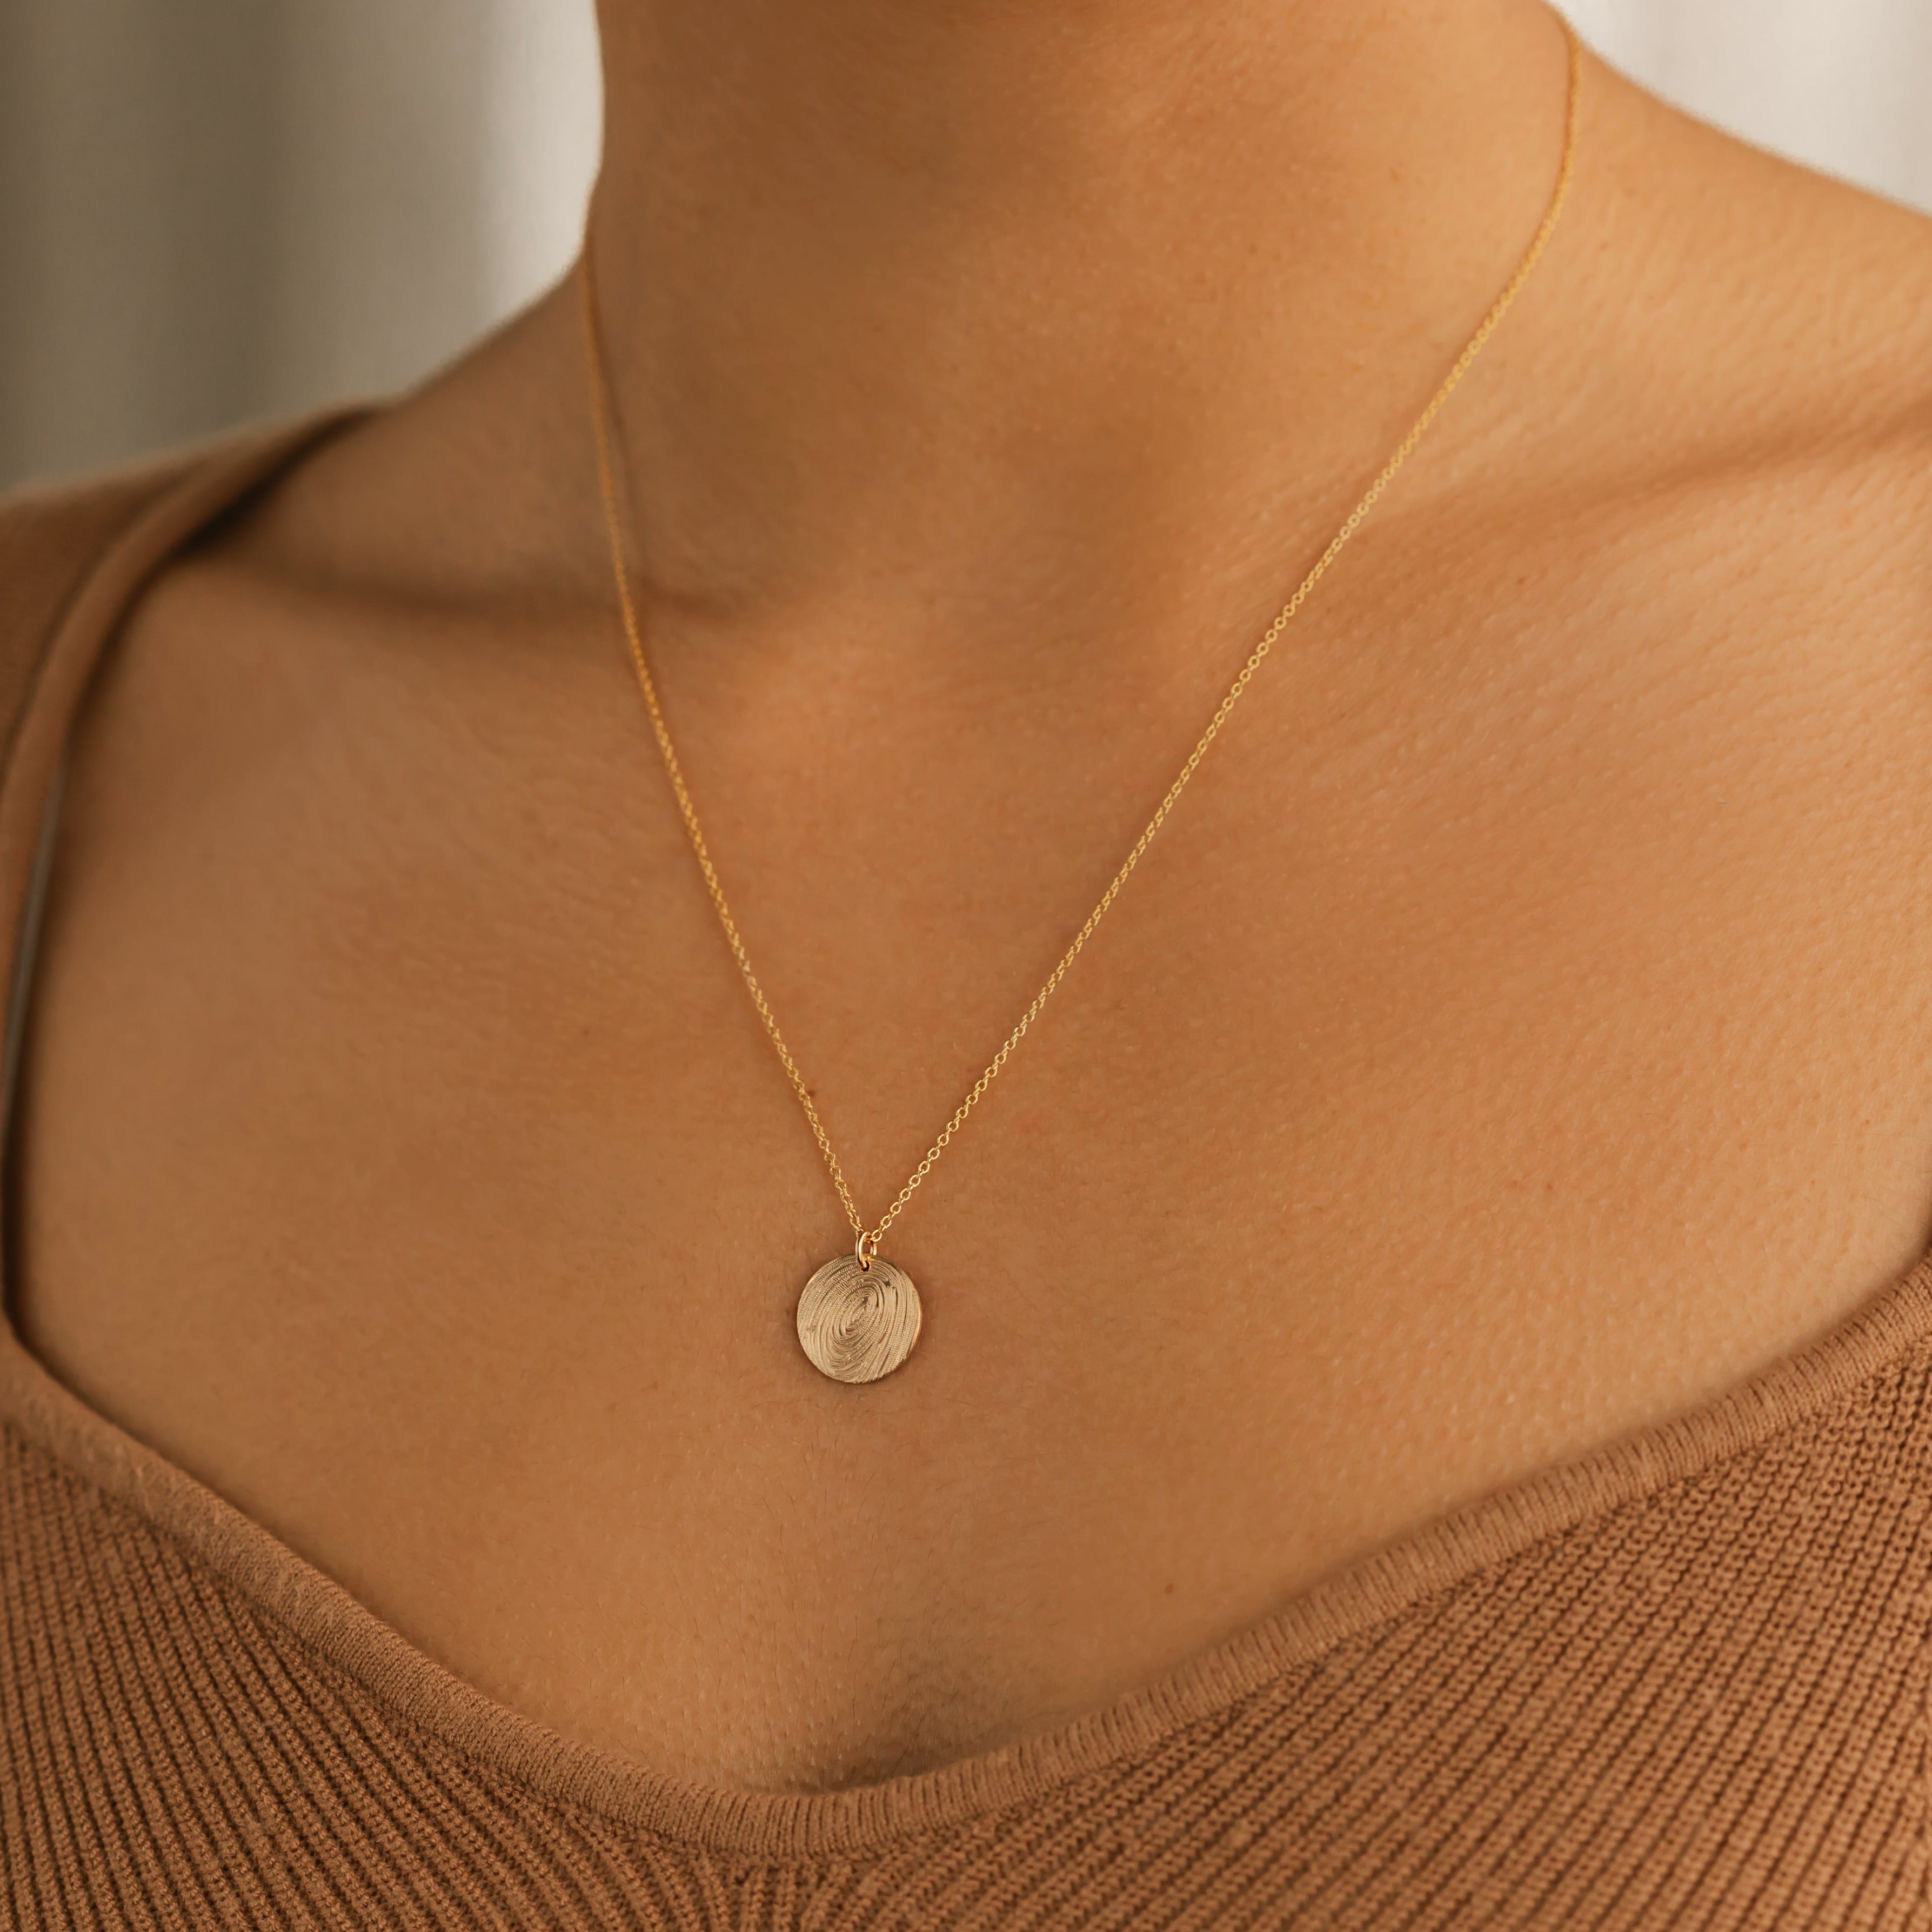 Gold fingerprint necklace made in canada